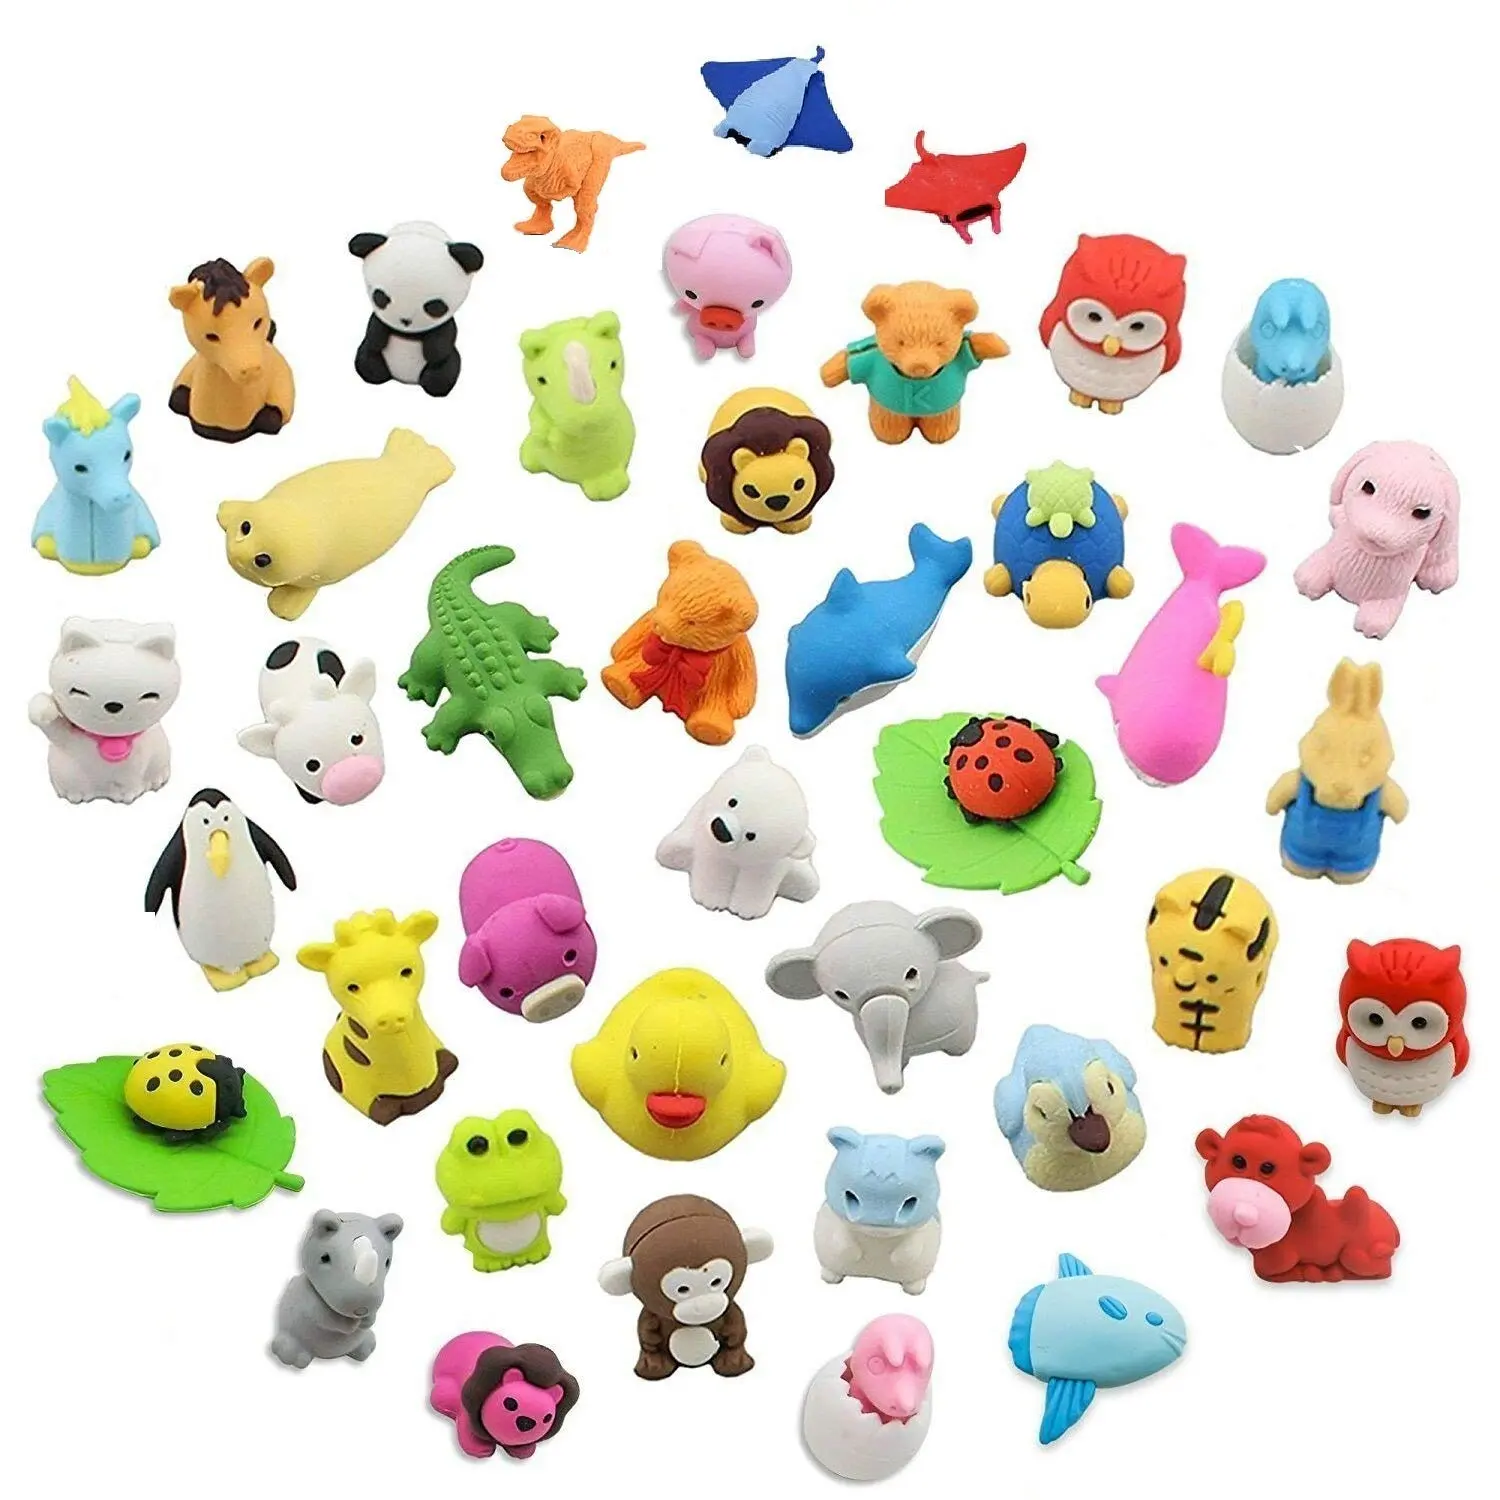 Mity rain Japanese Animal Erasers for Kids,36 Pack Mini Puzzle Eraser Take Apart Toys,Animal Pencil Erasers Set,Novelty Party Favors Educational Gift